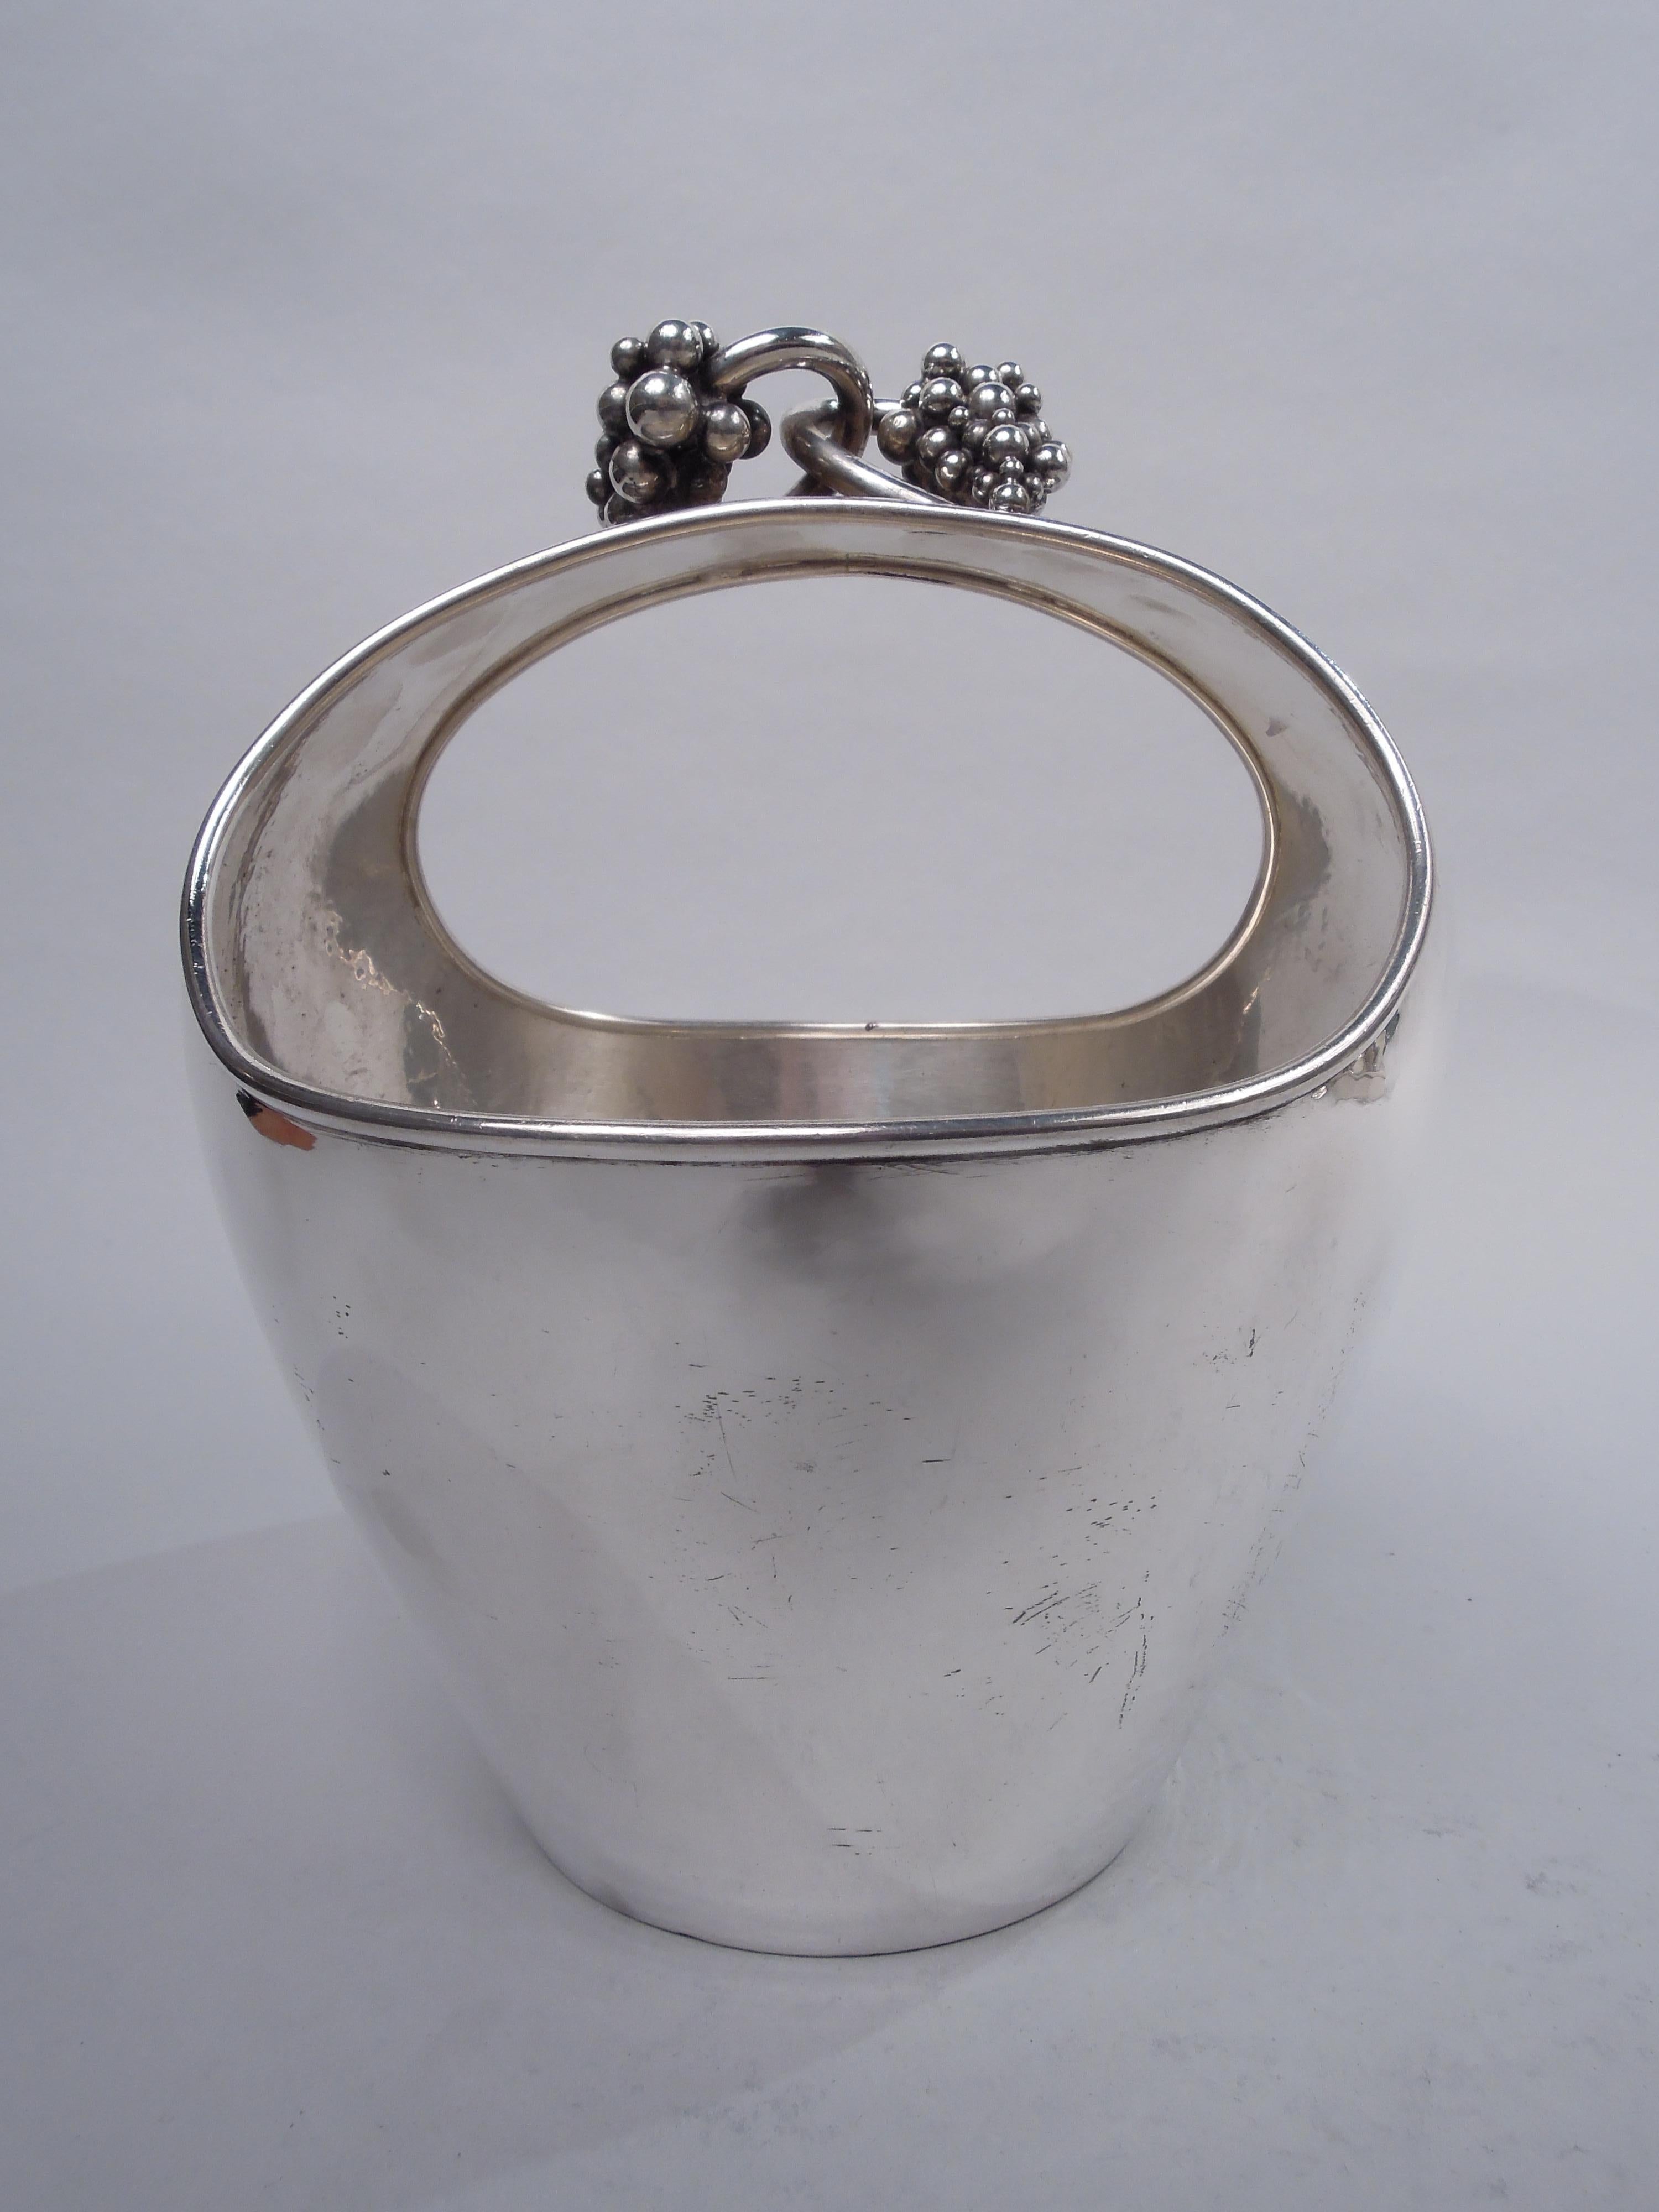 Danish Modern sterling silver basket. Wide ovoid body with integral central handle; cast grape bunches with entwined vines mounted to handle top. Handwork visible on interior. A stylish Midcentury design that reflects the Jensen influence. Fully